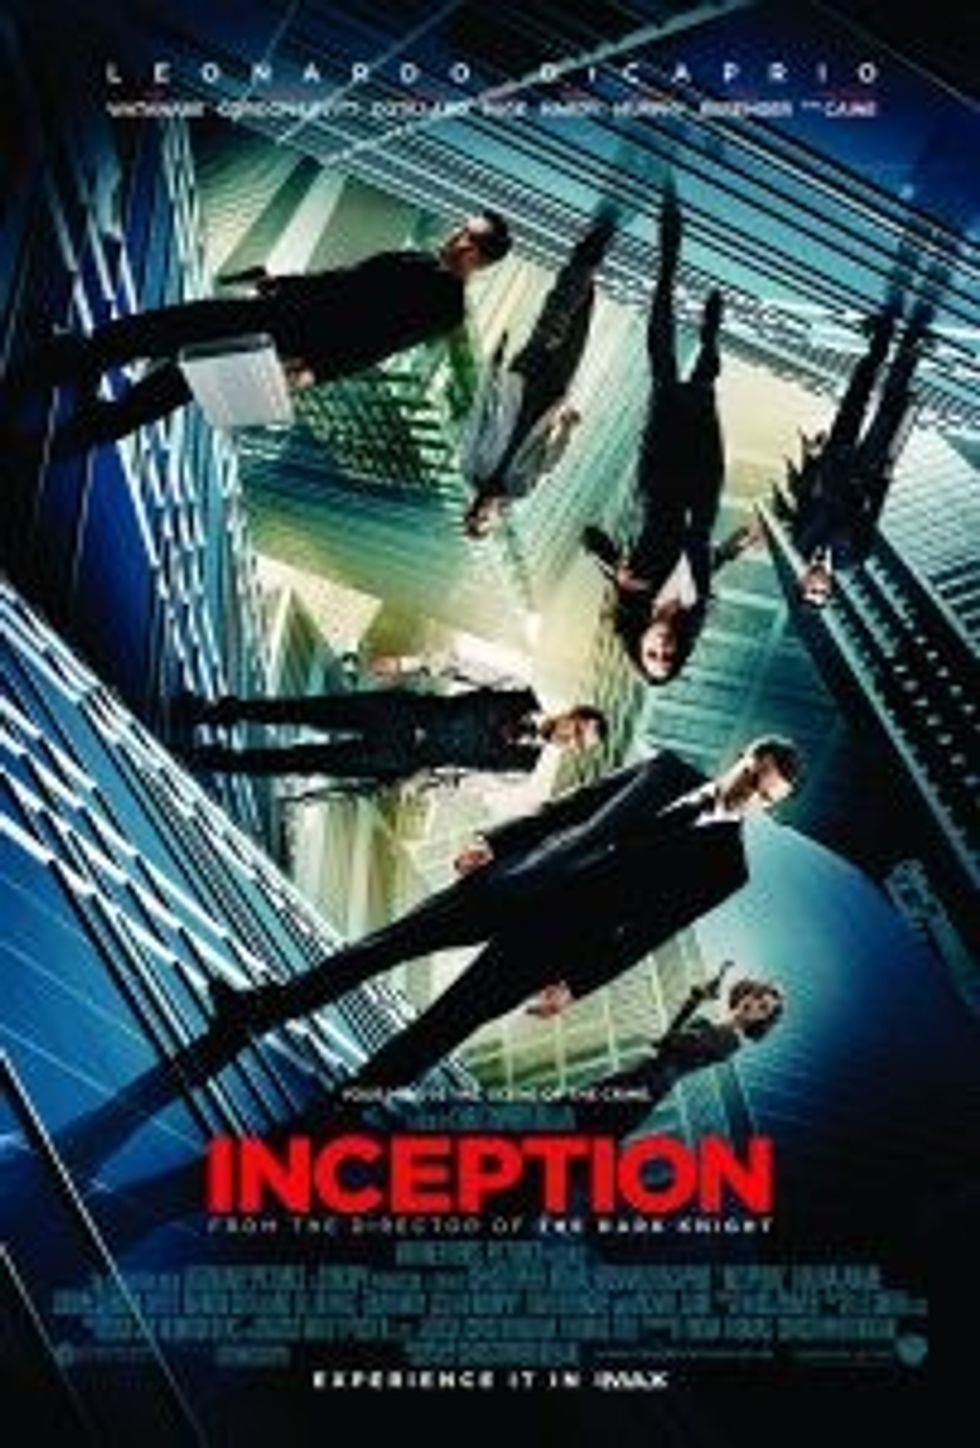 Inception intl imax poster small 203x300 1